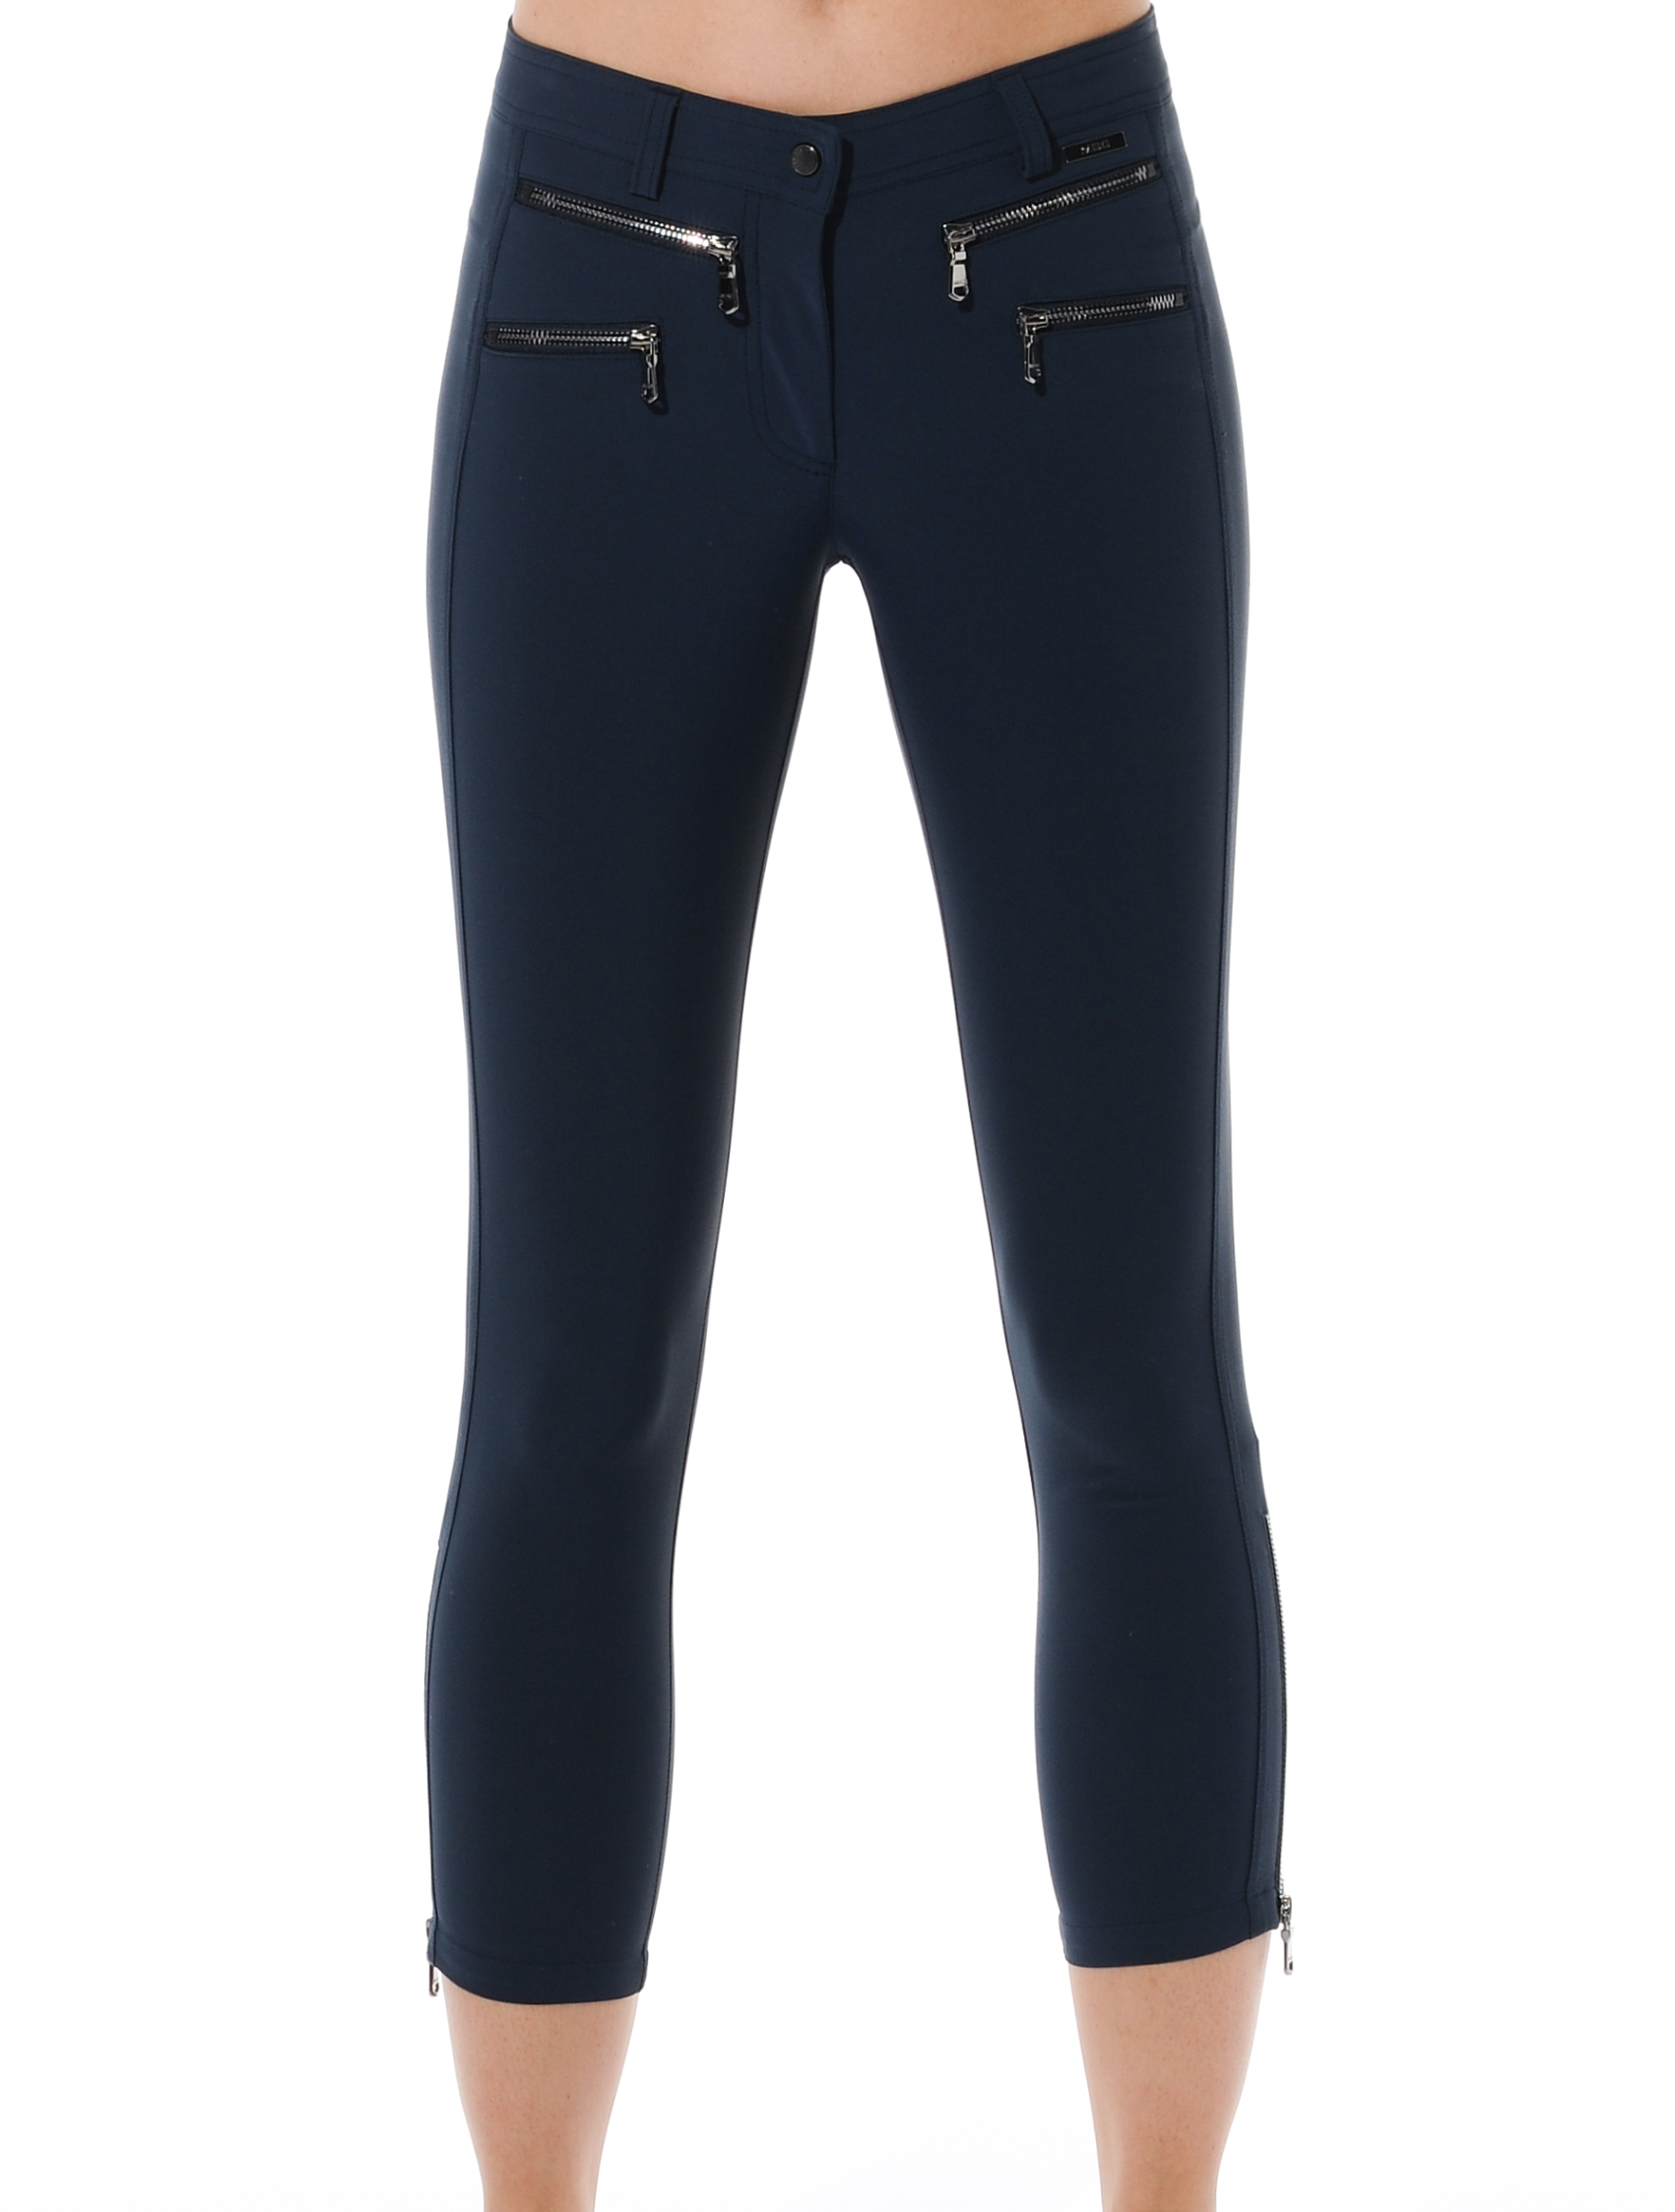 4way stretch double zip cropped pants navy 